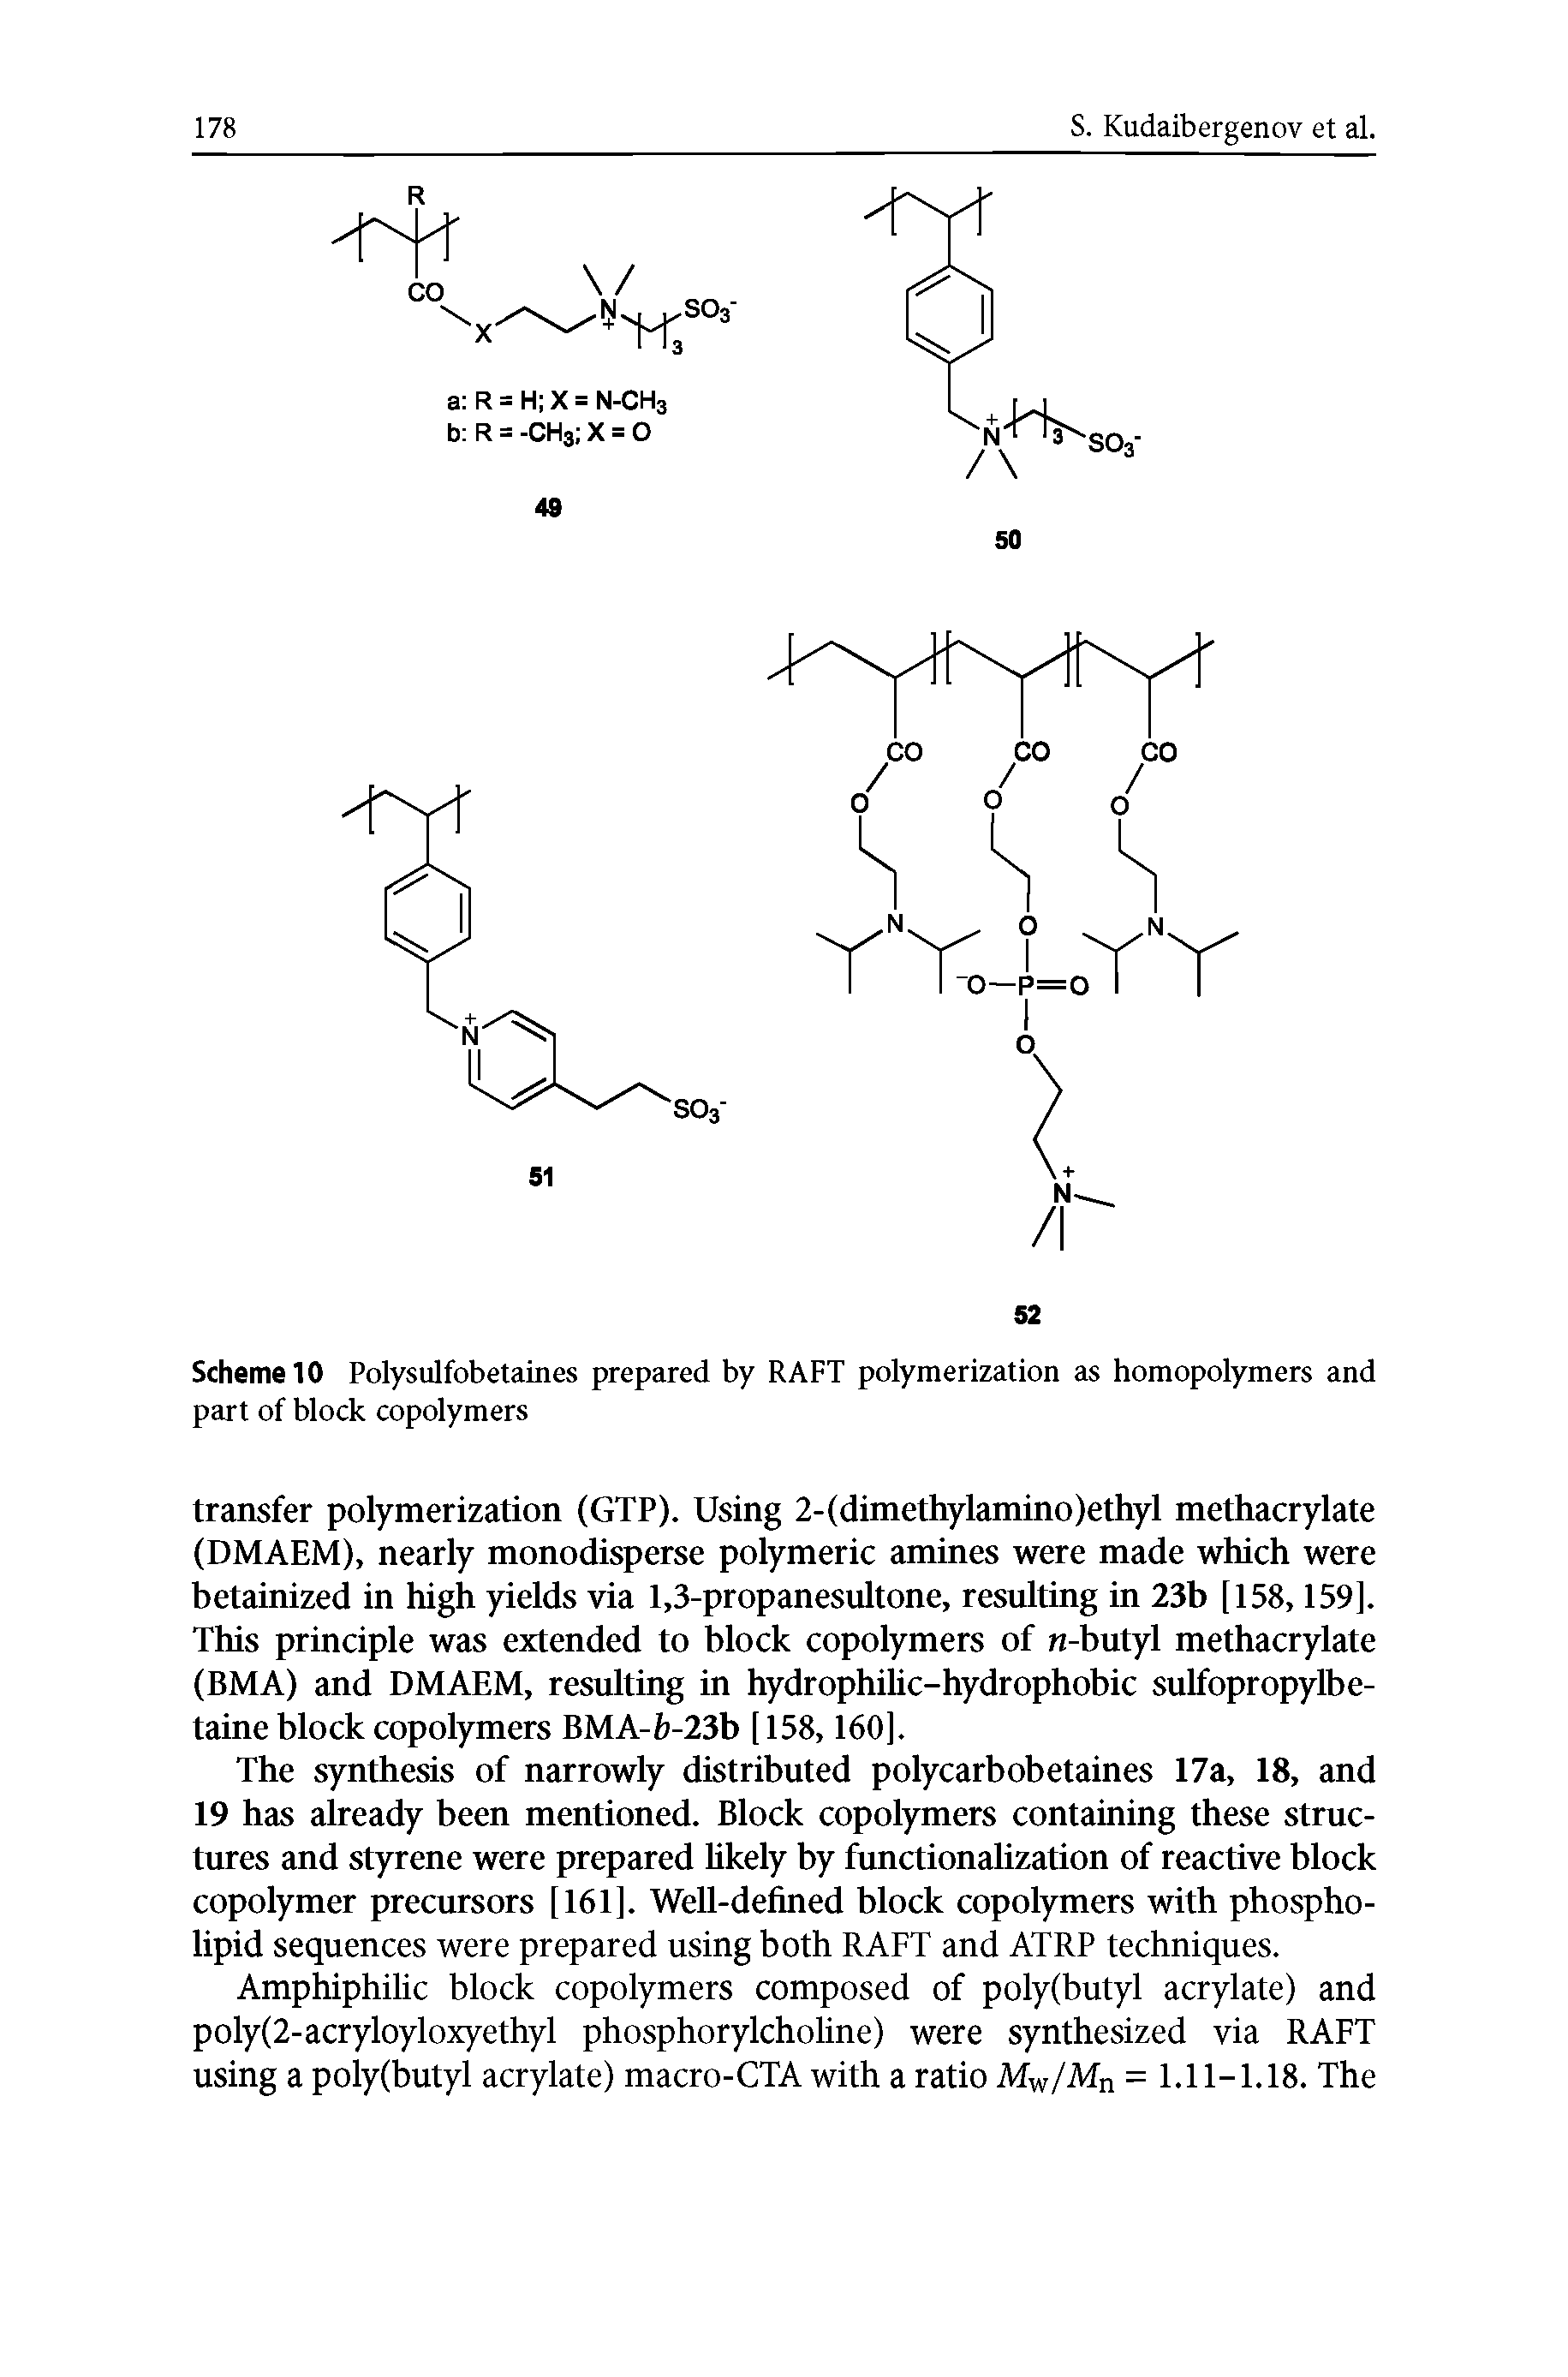 Scheme 10 Polysulfobetaines prepared by RAFT polymerization as homopolymers and part of block copolymers...